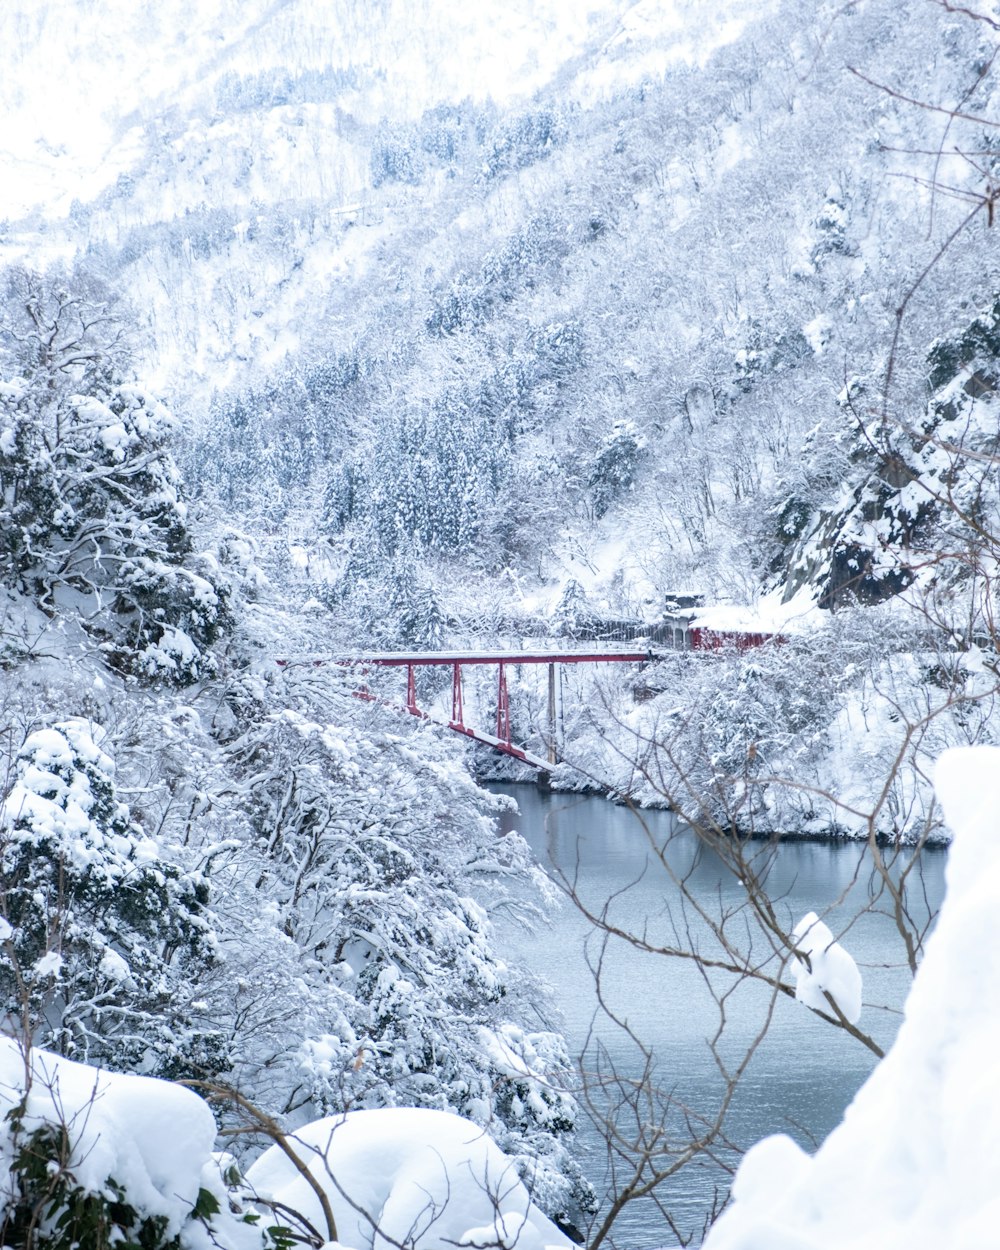 a bridge over a body of water surrounded by snow